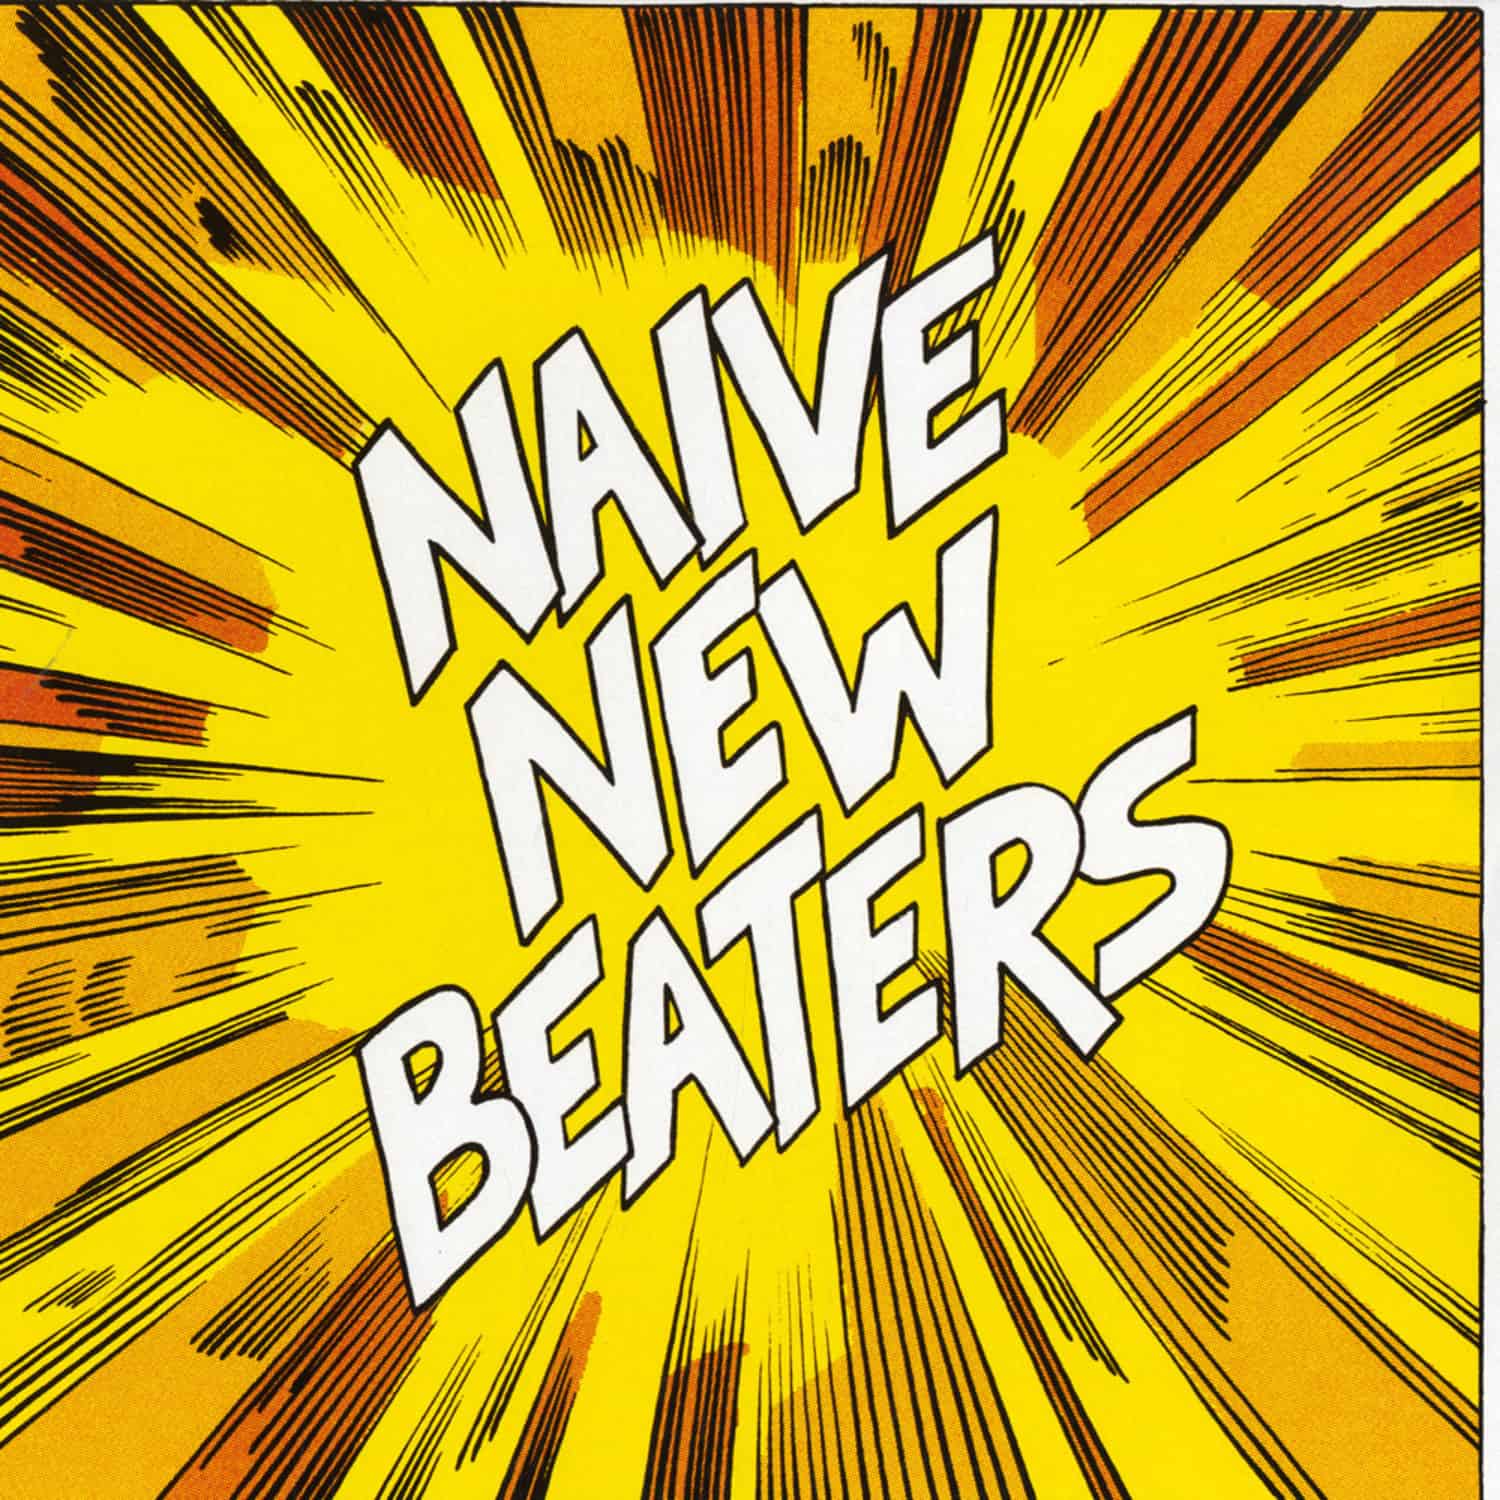 Naive New Beaters - THATS WHAT I LIKE EP